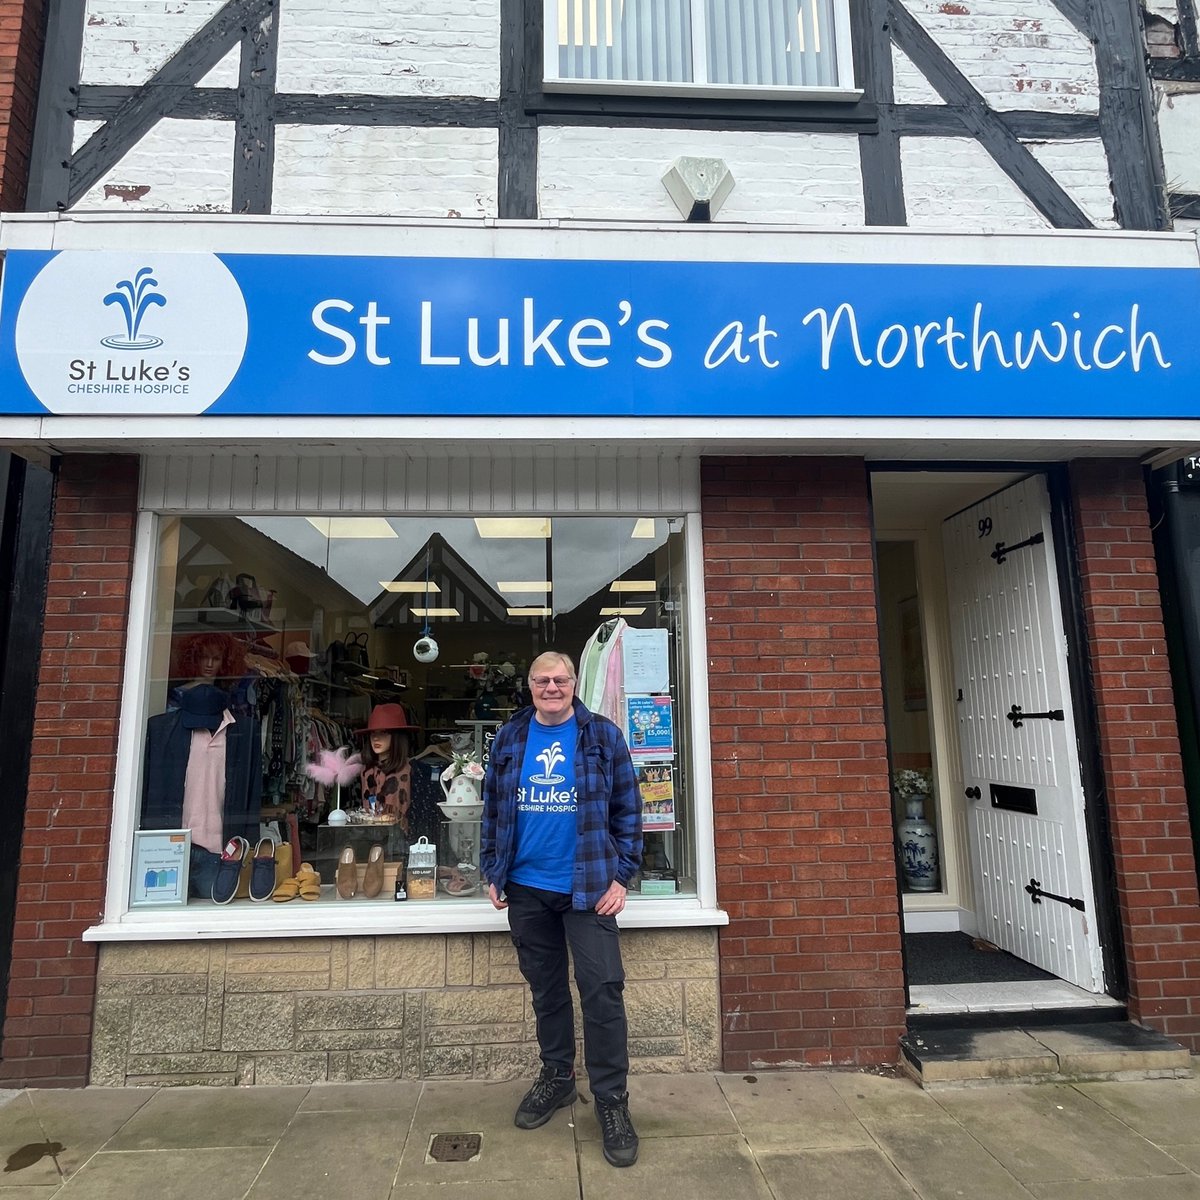 Have you checked out the newly renovated @StLukesHospice charity shop on Witton Street yet? You'll find a treasure trove of high-quality pre-loved items at unbeatable prices. From homely bric-a-brac 🍴 to stylish menswear 👕, womenswear 👗, unique accessories 👞 and beyond!